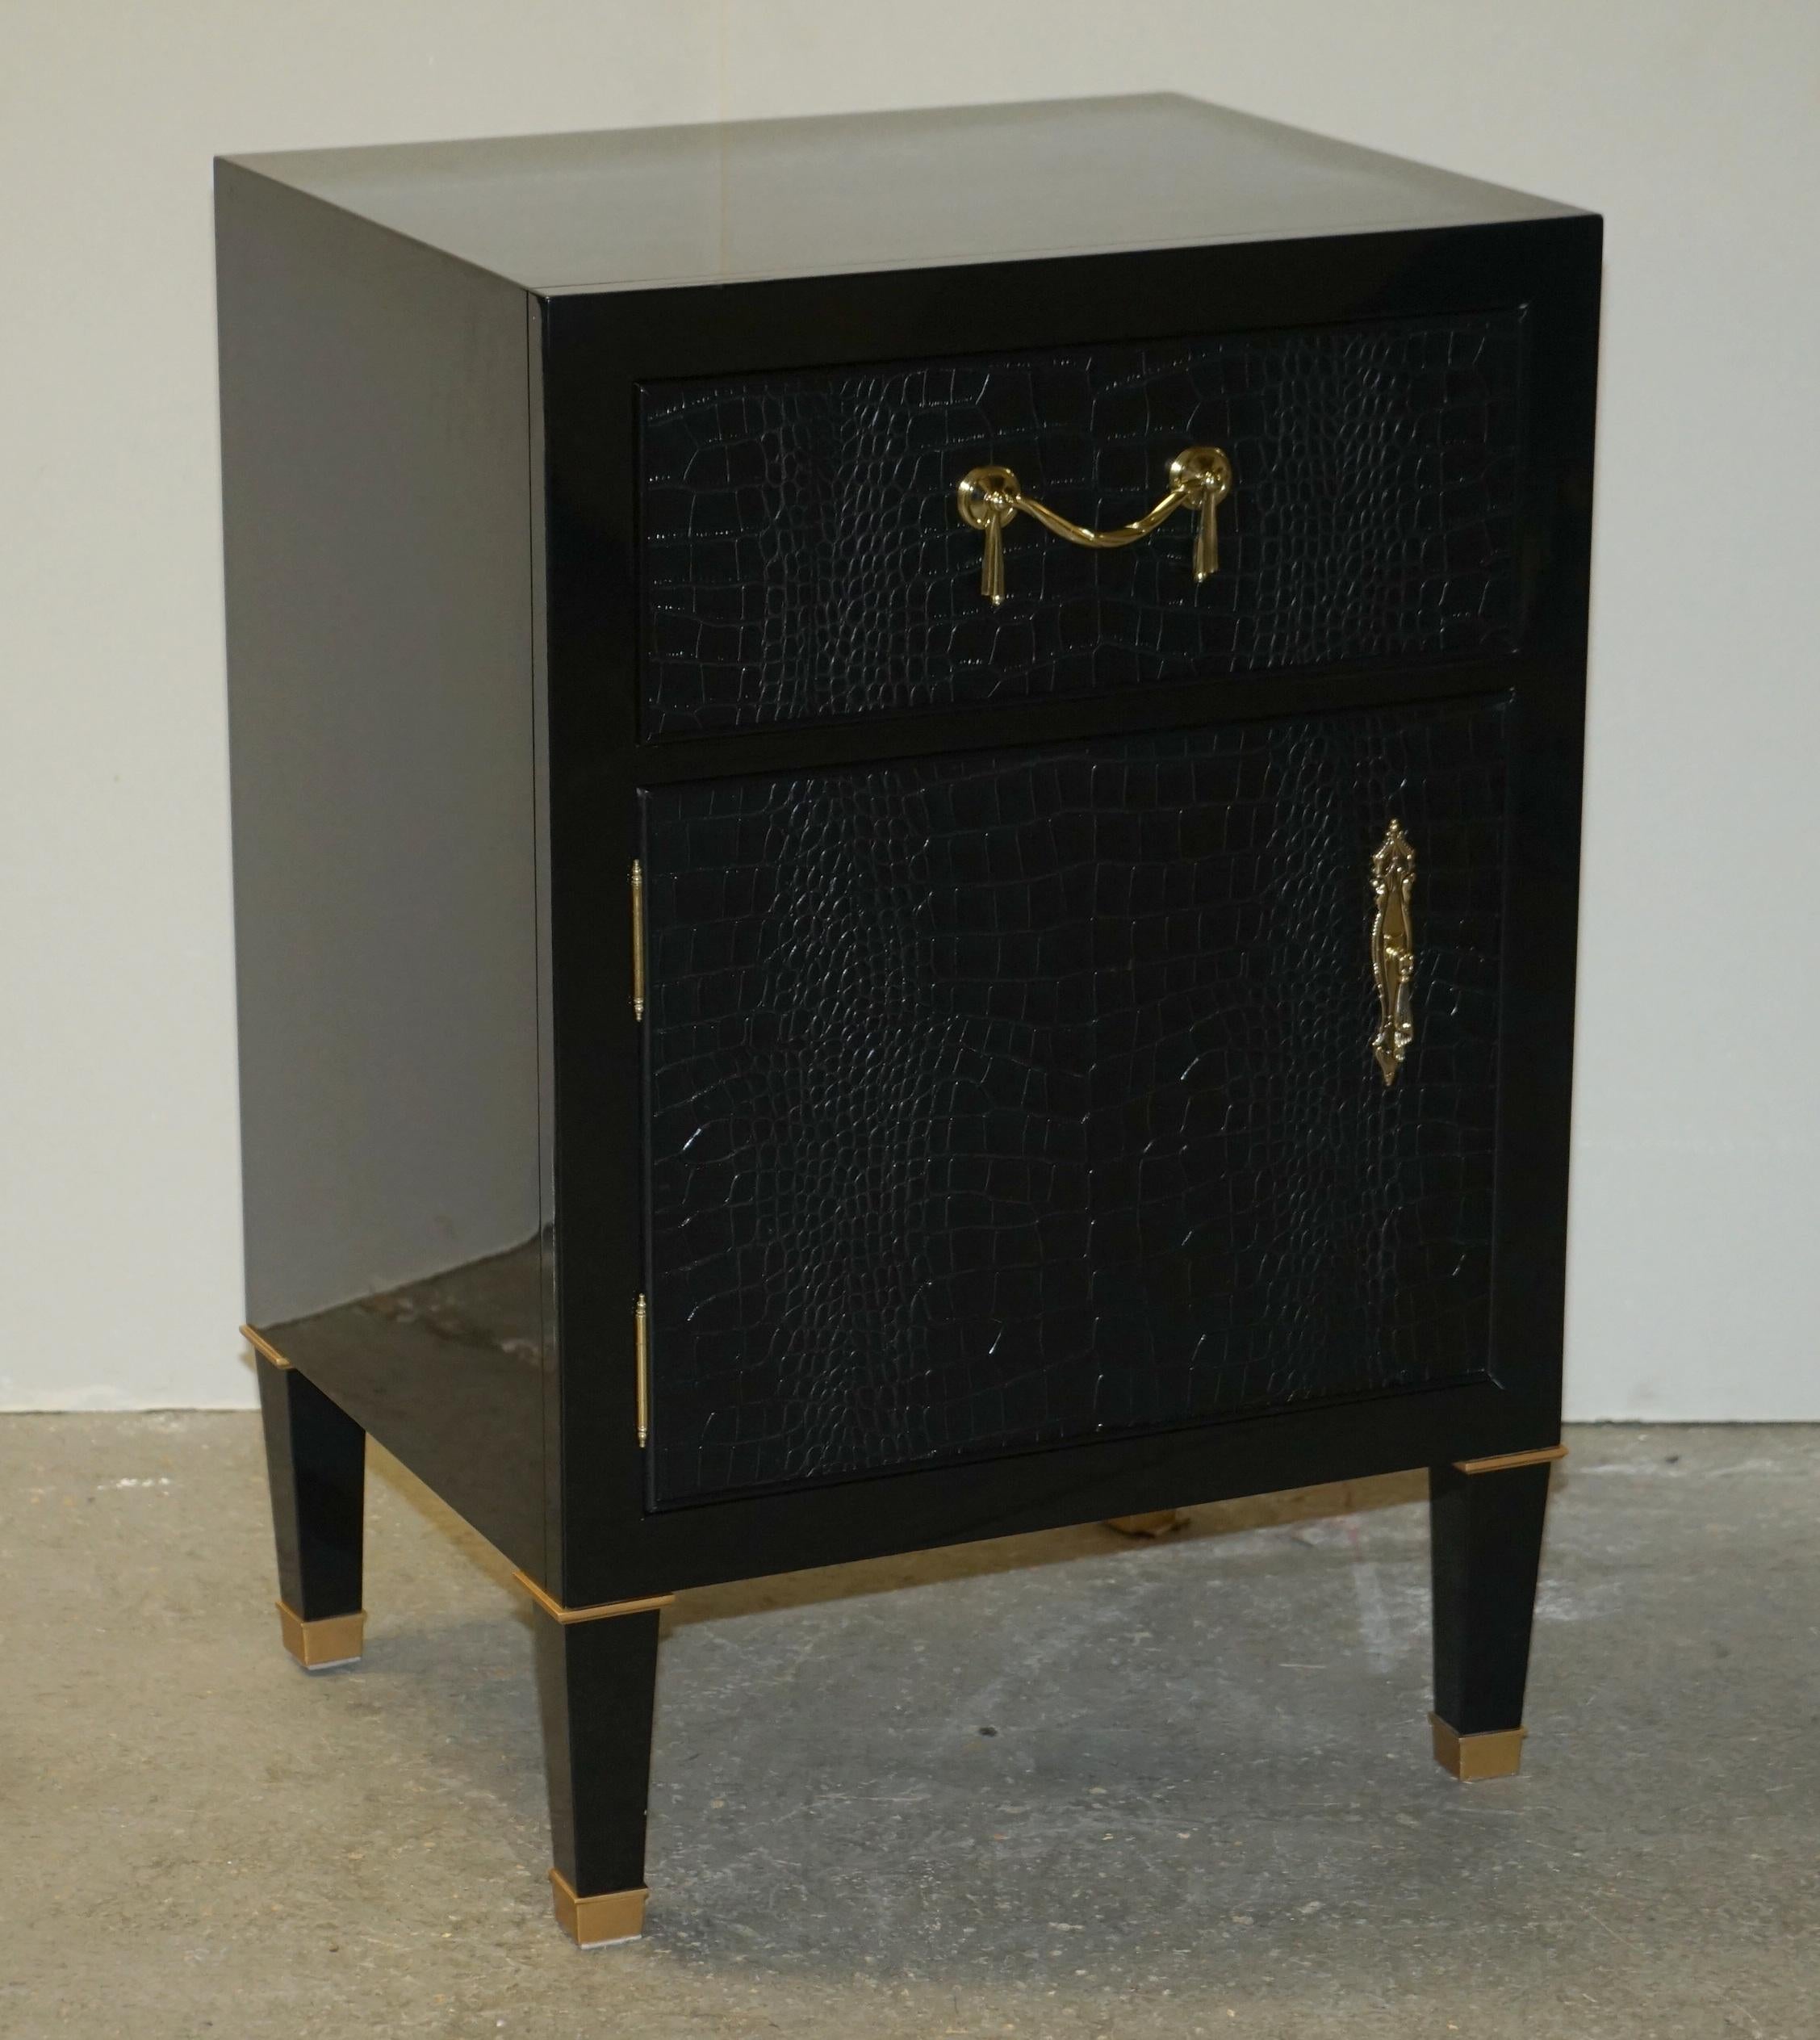 We are delighted to offer for sale this exquisite pair of RRP £17,310 Ralph Lauren Brook Street Alligator / Crocodile patina leather nightstand / side table cupboards.

I have around 40 pieces of new Ralph Lauren furniture now in stock, most of